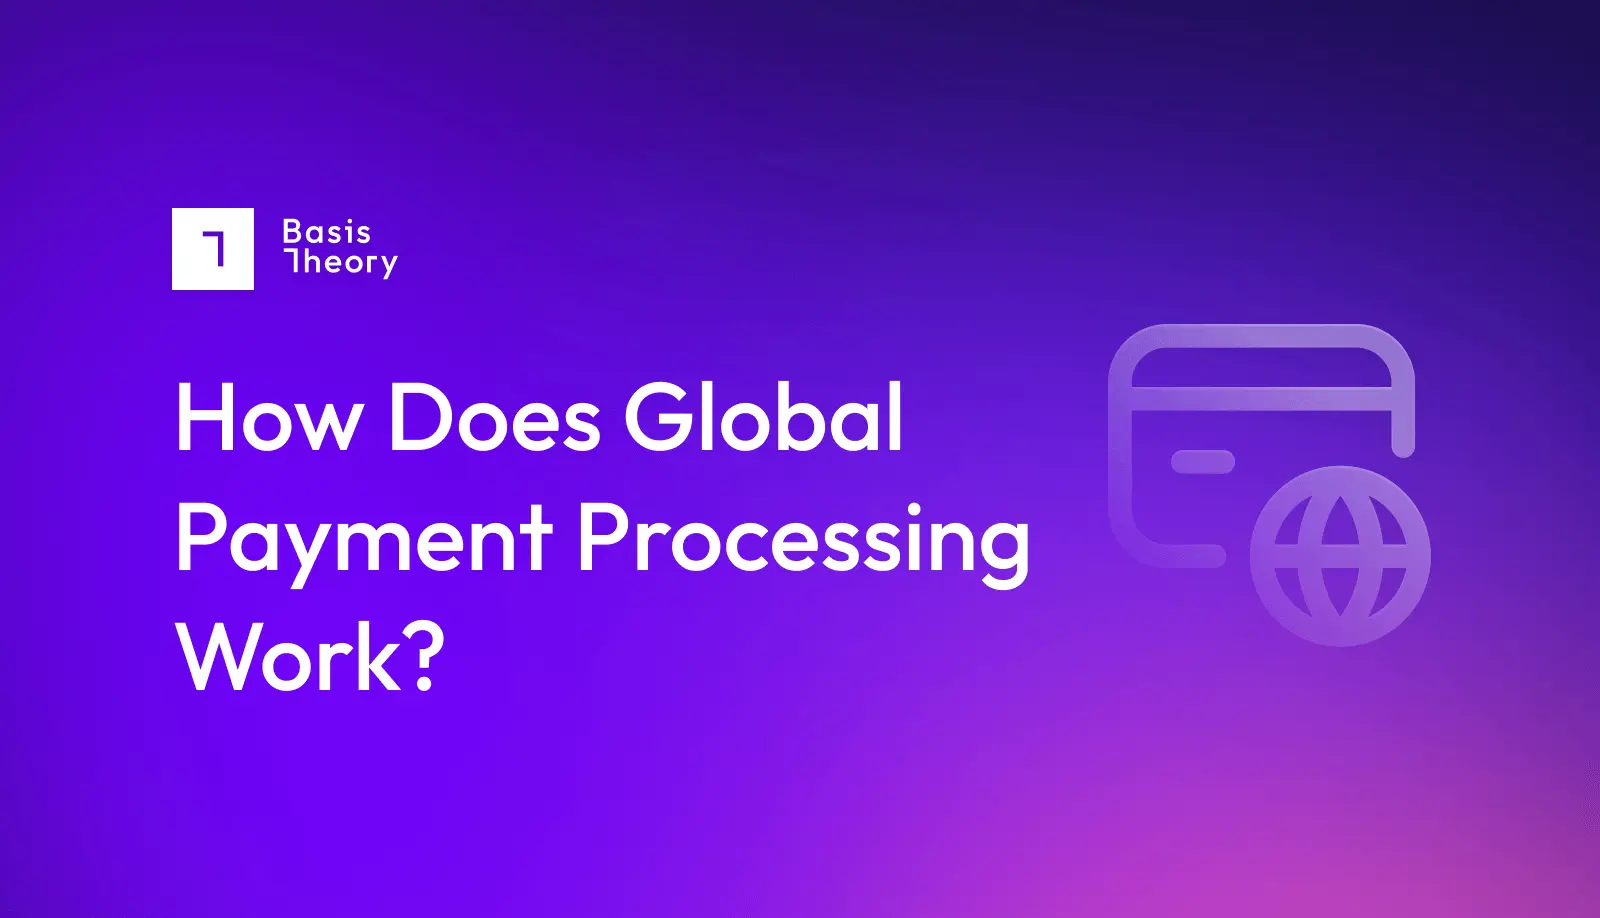 How Does Global Payment Processing Work?